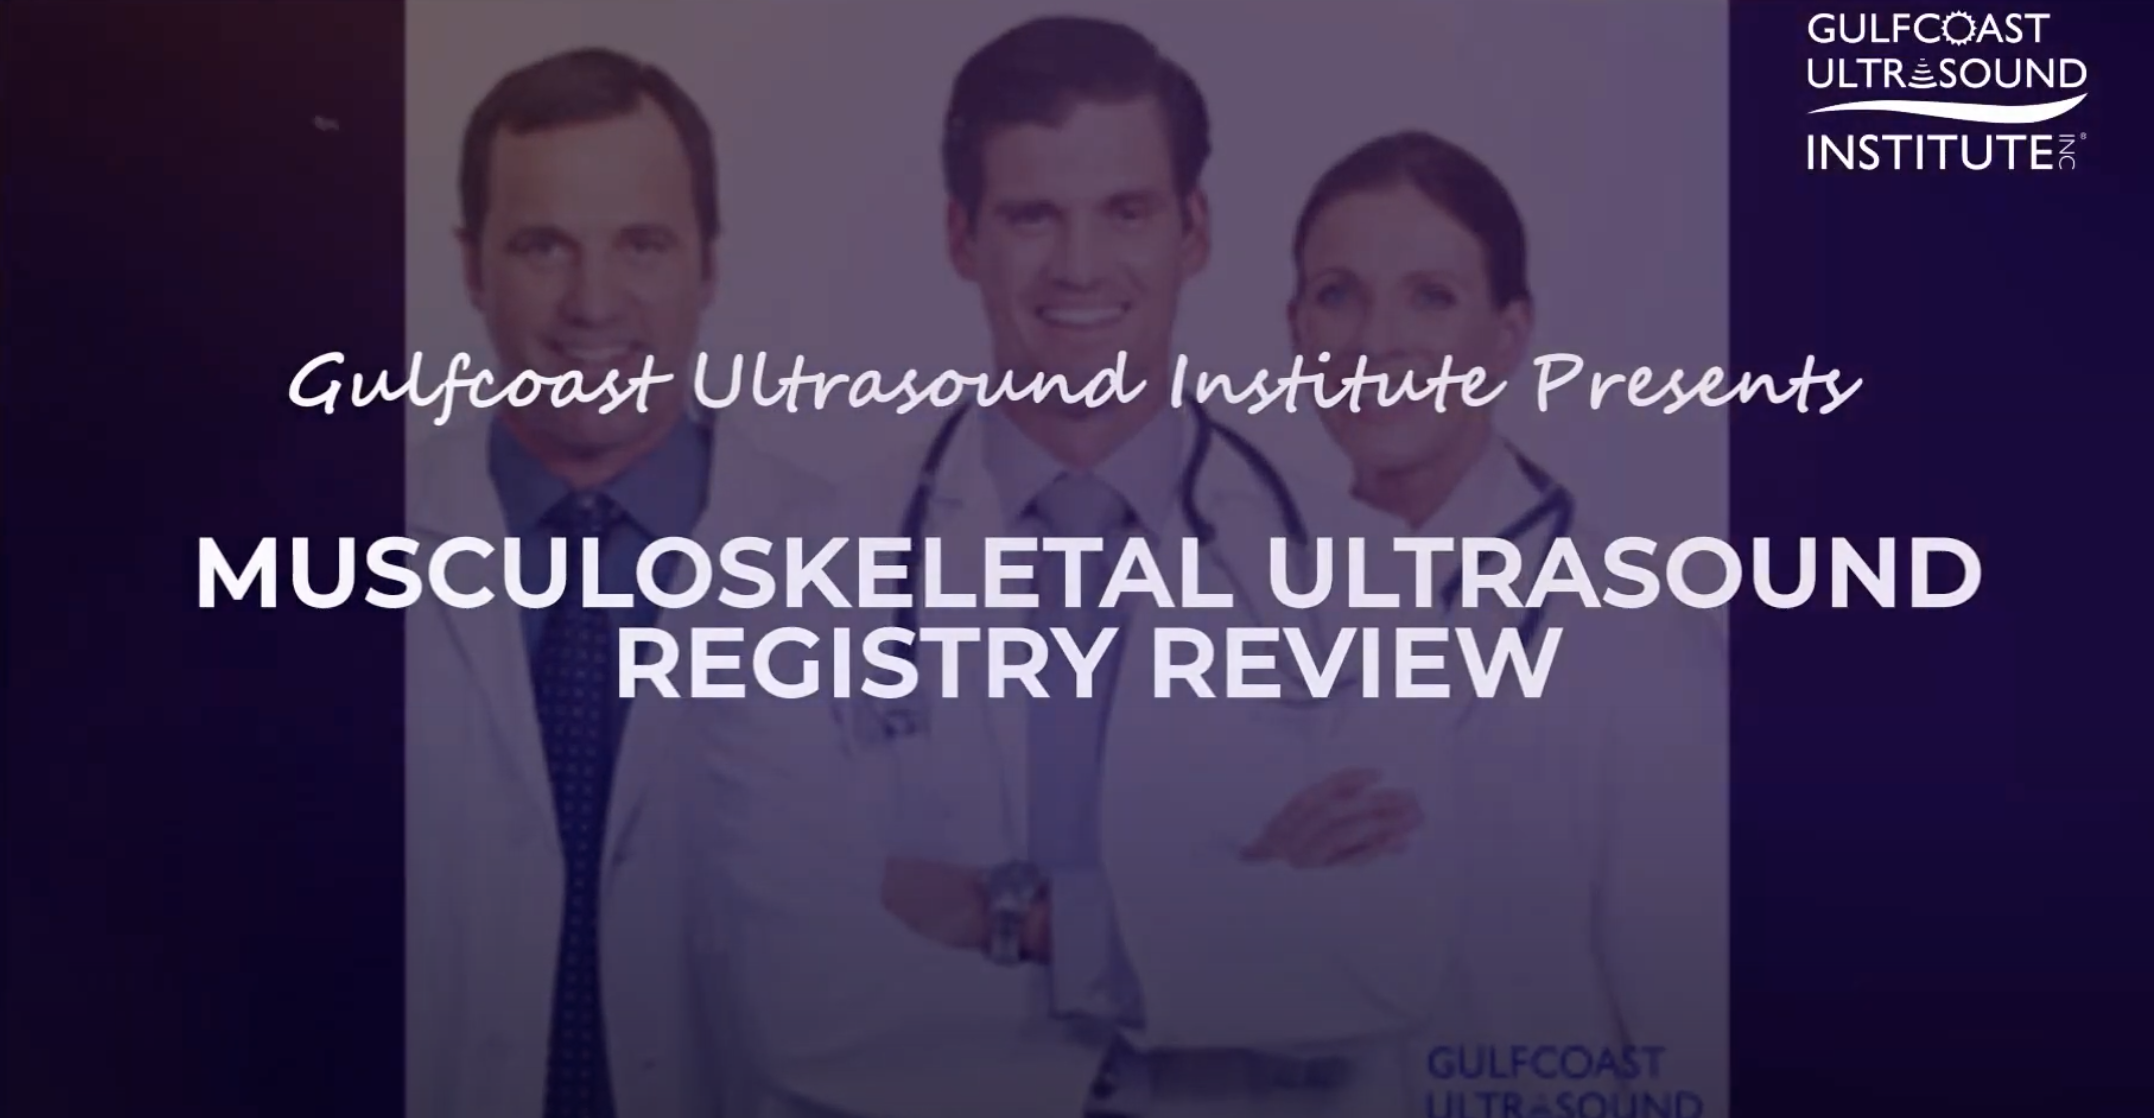 Where is the best place to study for MSK Ultrasound Registry Review, RMSK, RMSKS?